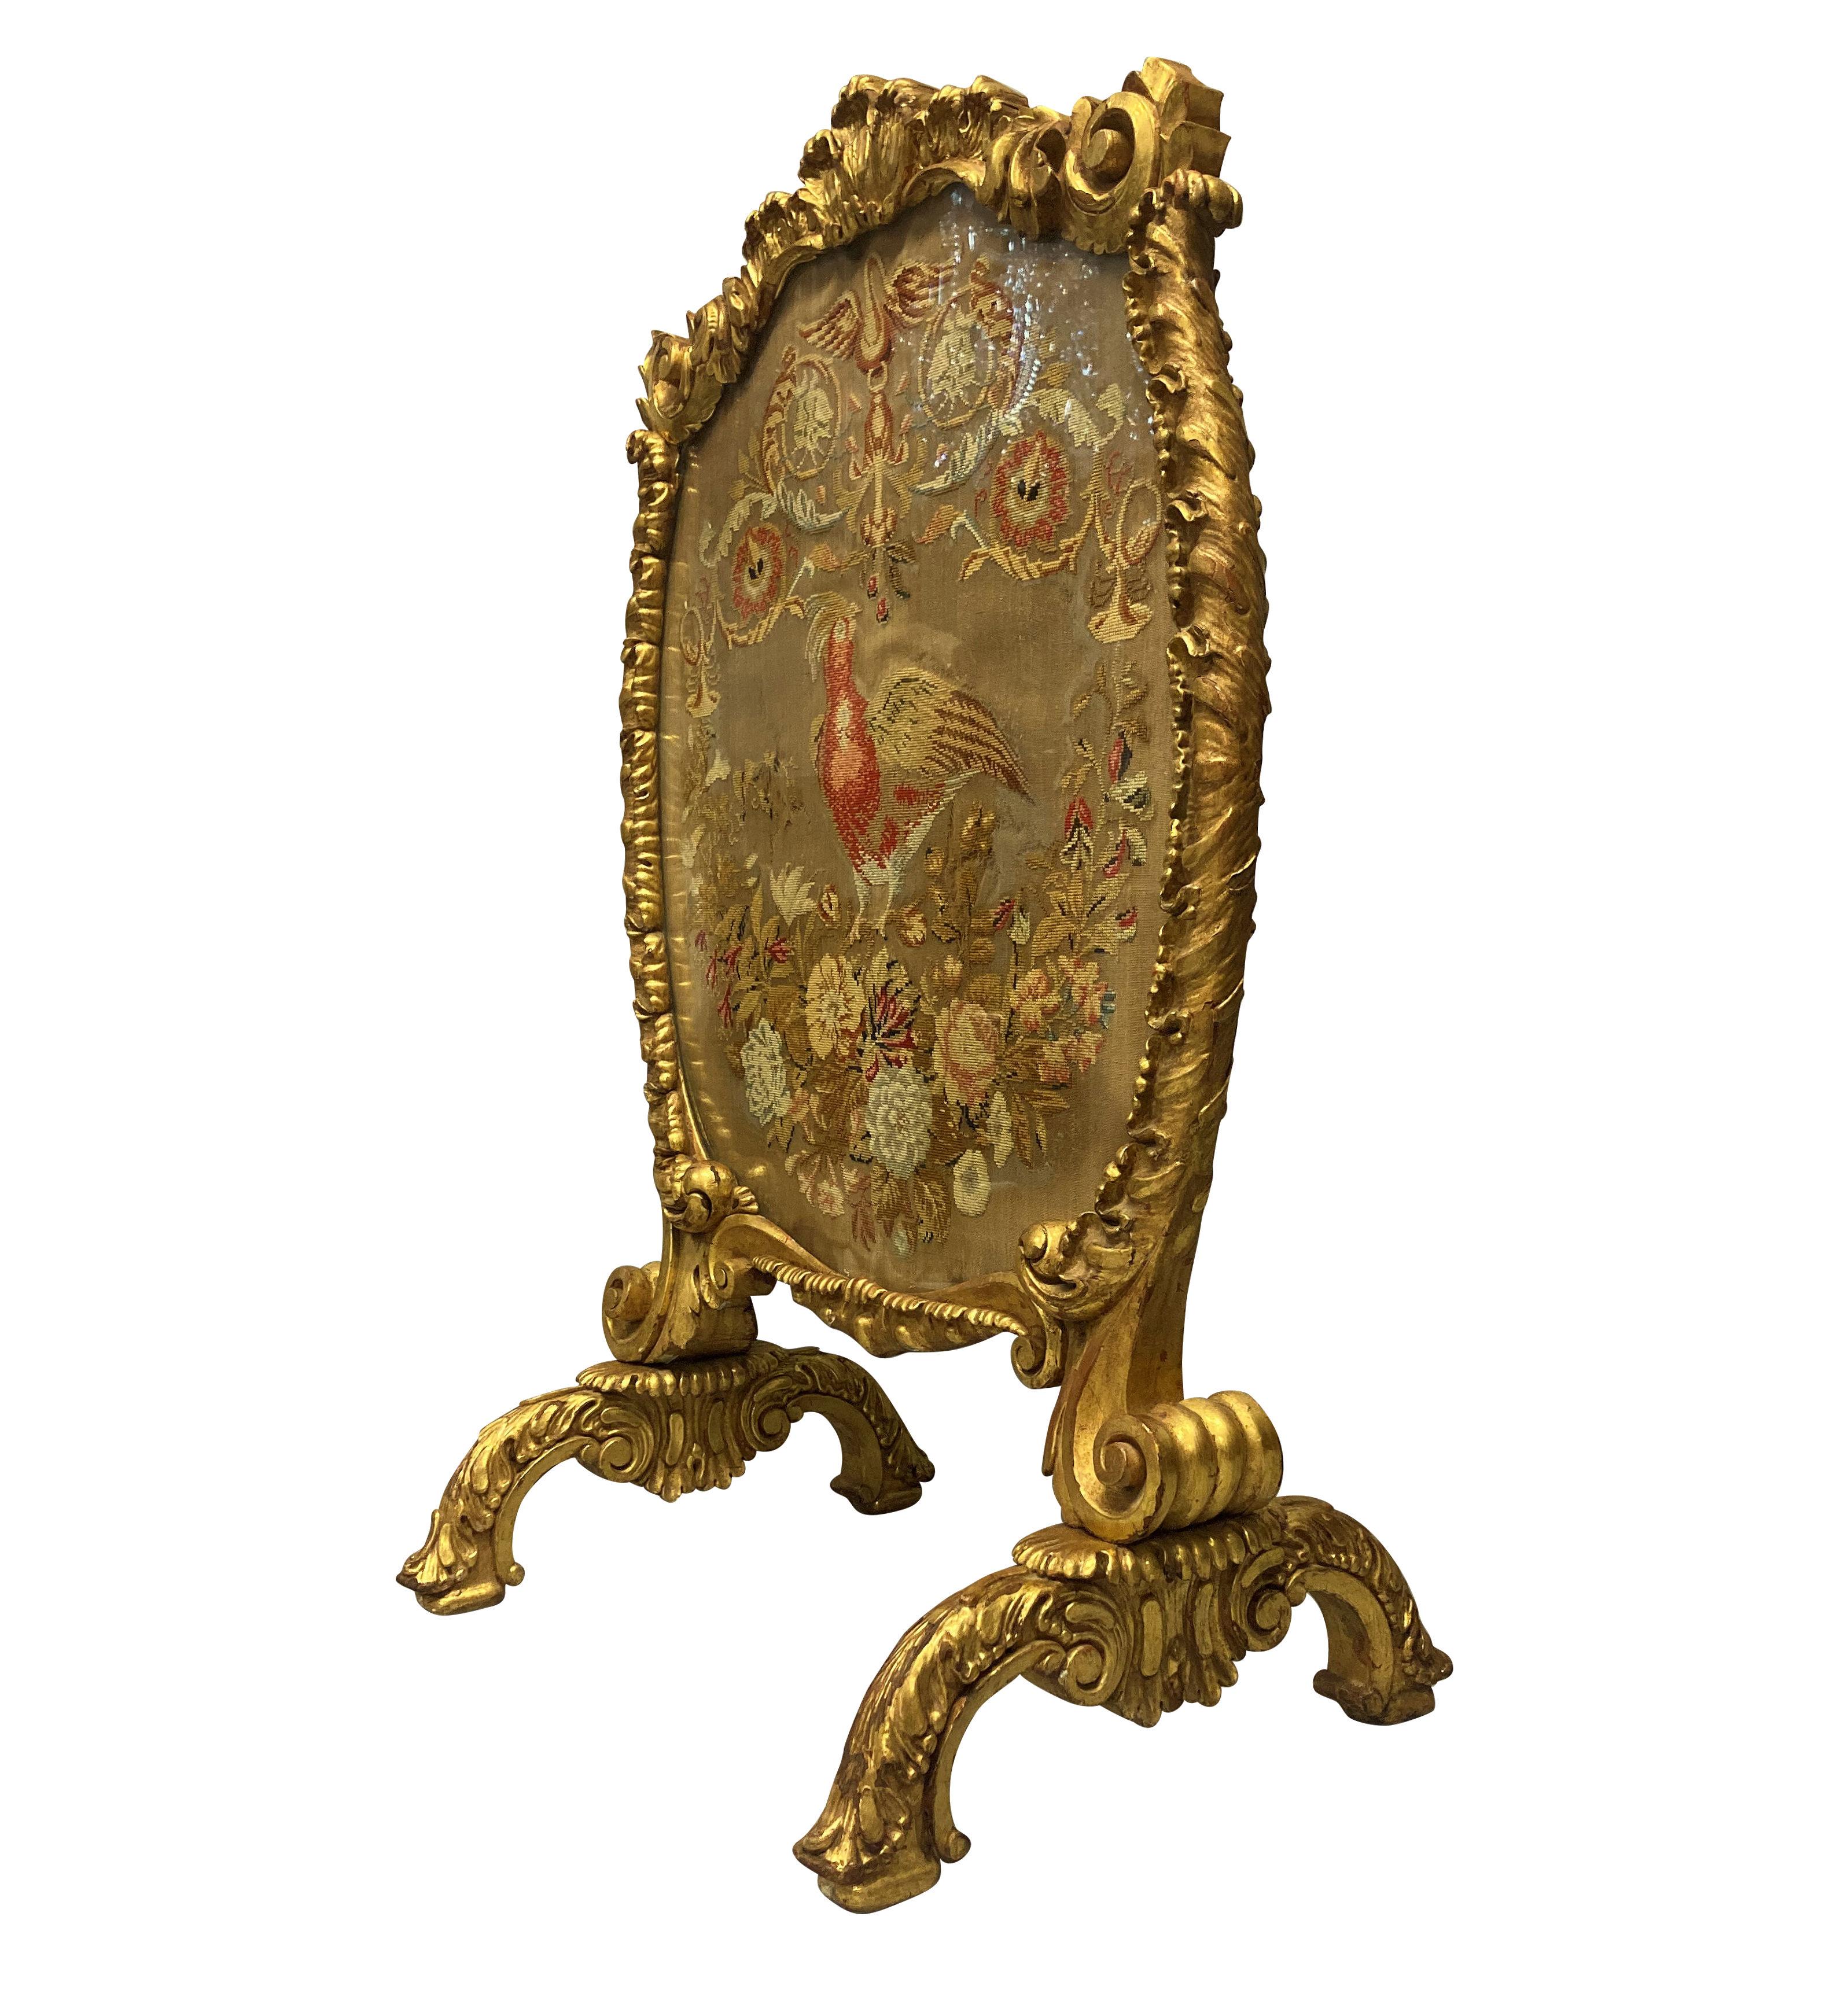 A large and finely carved George III giltwood fire screen. Containing a beautiful needlework tapestry, now under glass and the reverse of painted canvas. It is in 'Country House' condition with little or no restoration.

Full provenance available.